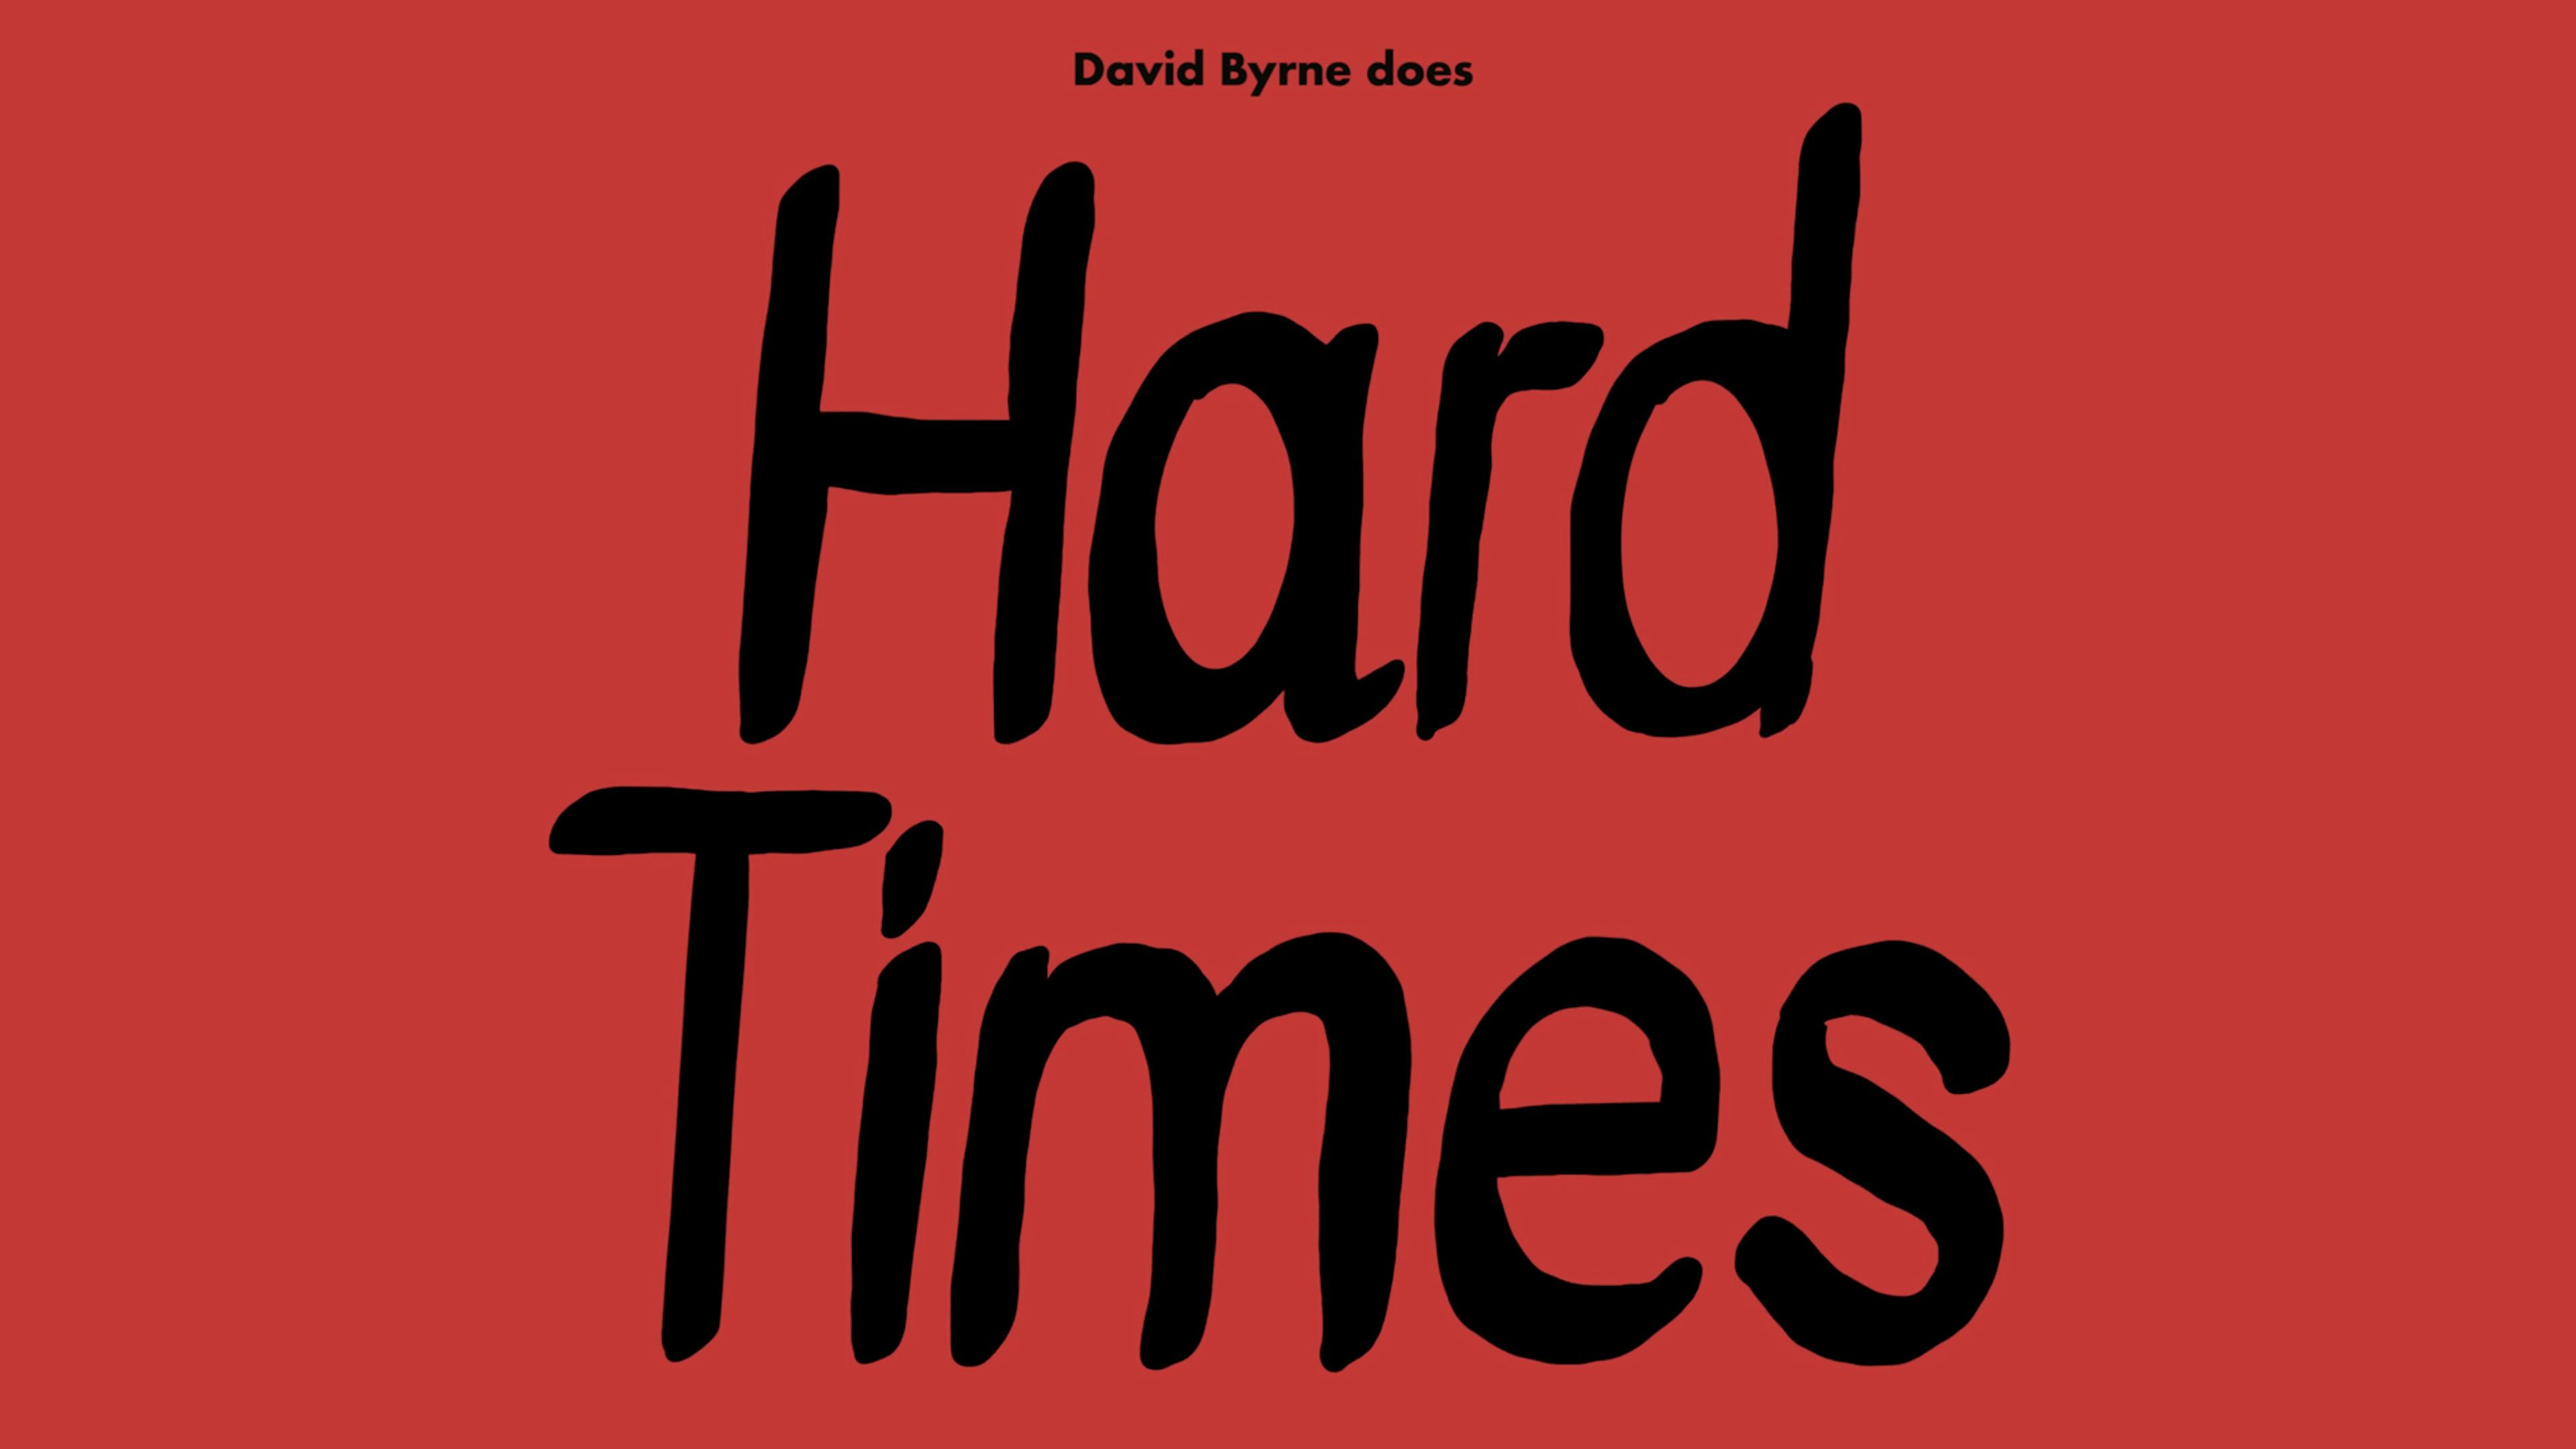 Listen to David Byrne’s cover of Hard Times by Paramore